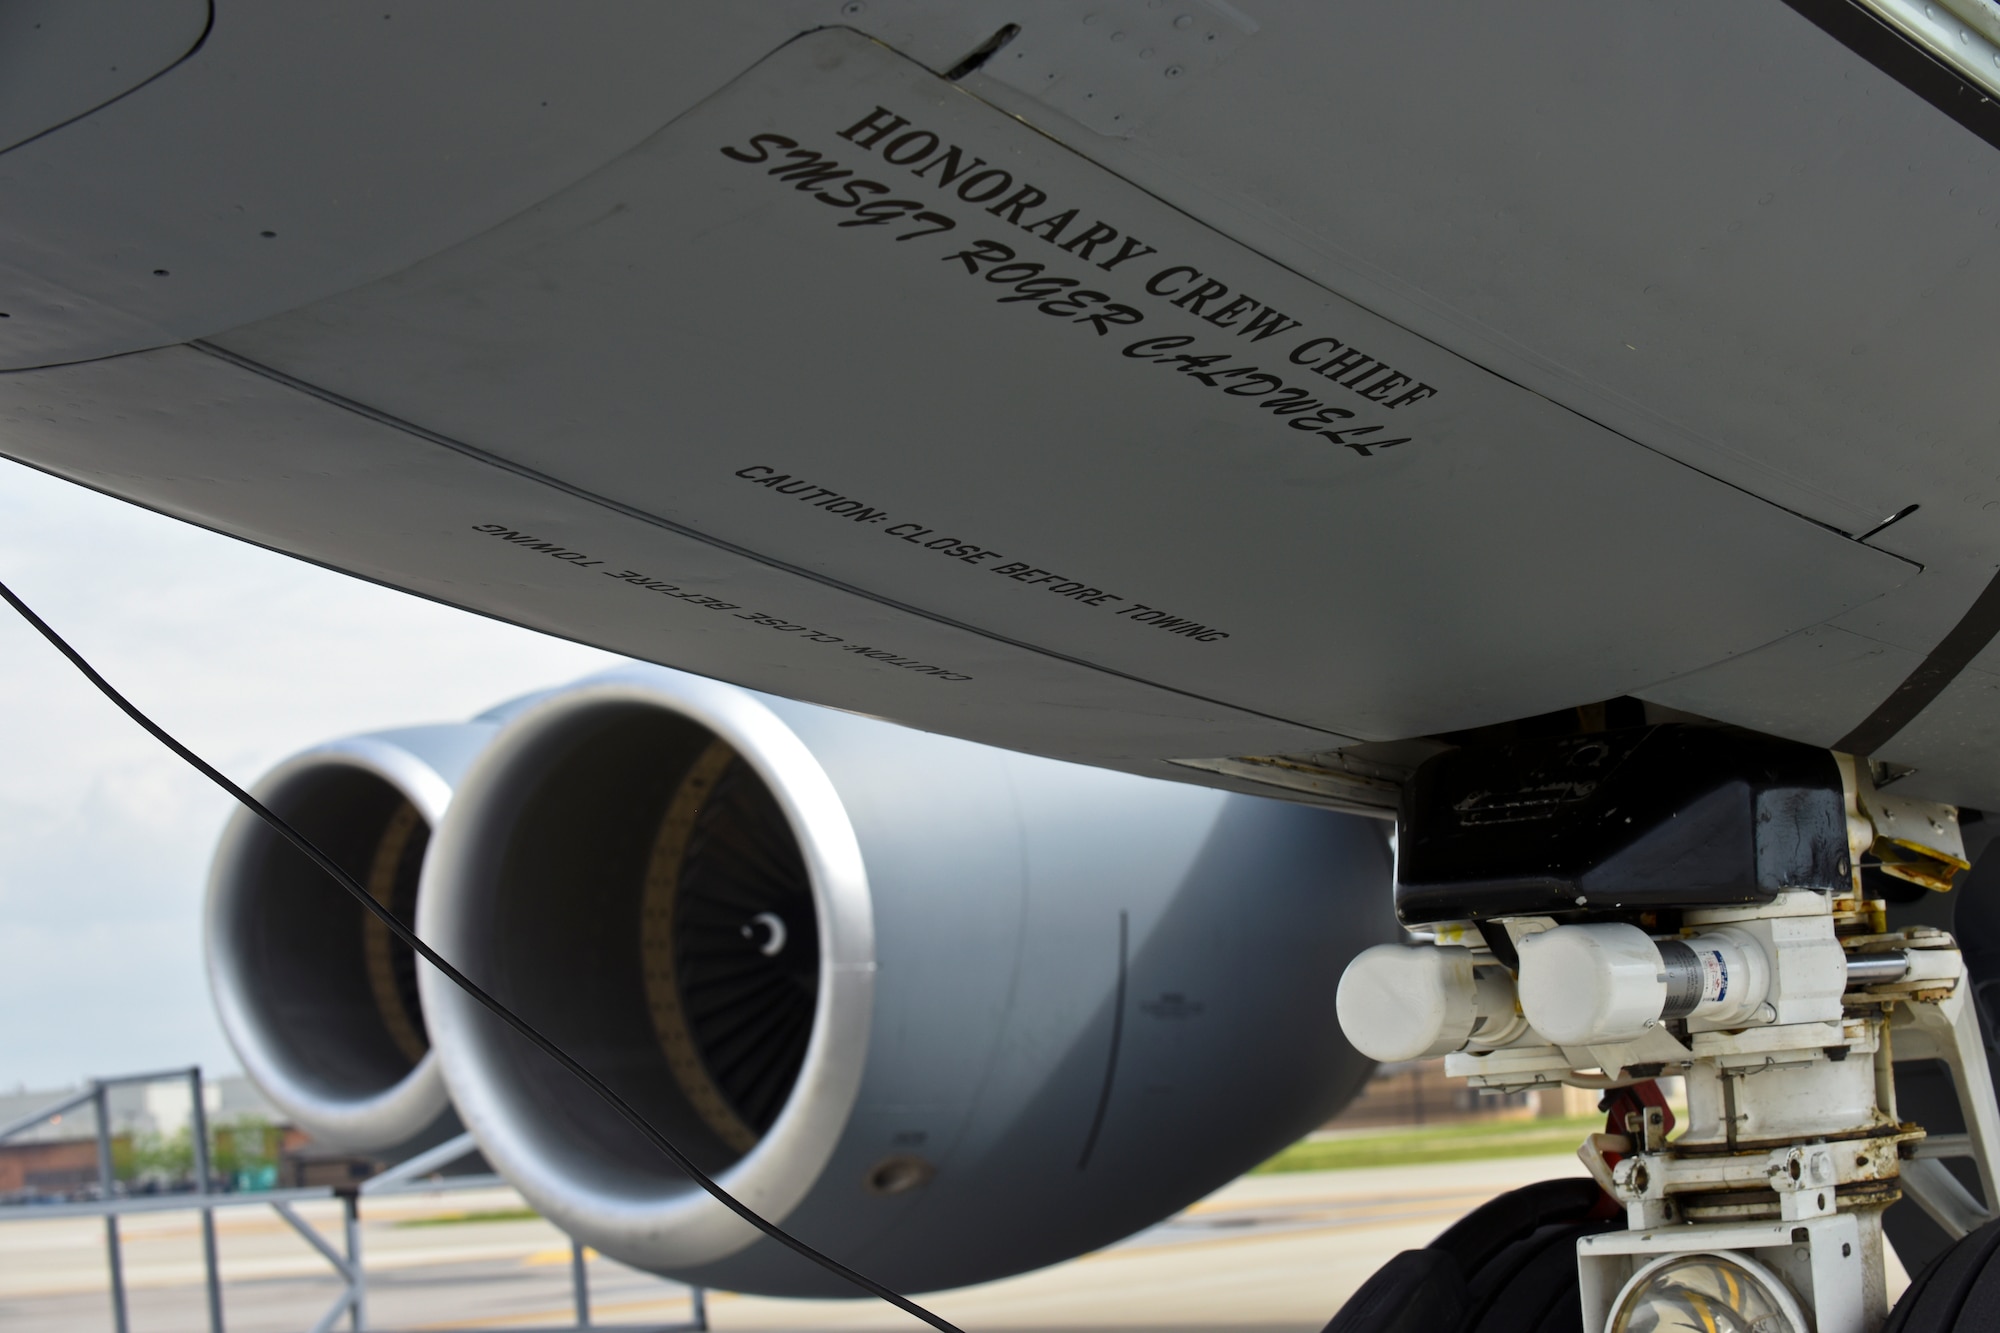 A KC-135 Stratotanker at the 121st Air Refueling Wing, Rickenbacker Air National Guard Base, Ohio, receives new artwork, to include a block “O” on the tail flash, racing stripes down the sides, “eyebrow” painting over the pilot and co-pilot’s windows, and nose art. Over the course of their normal maintenance schedule, the rest of the 121 ARW aircraft will receive the new artwork as well. (U.S. Air National Guard photo by Senior Airman Wendy Kuhn/Released)